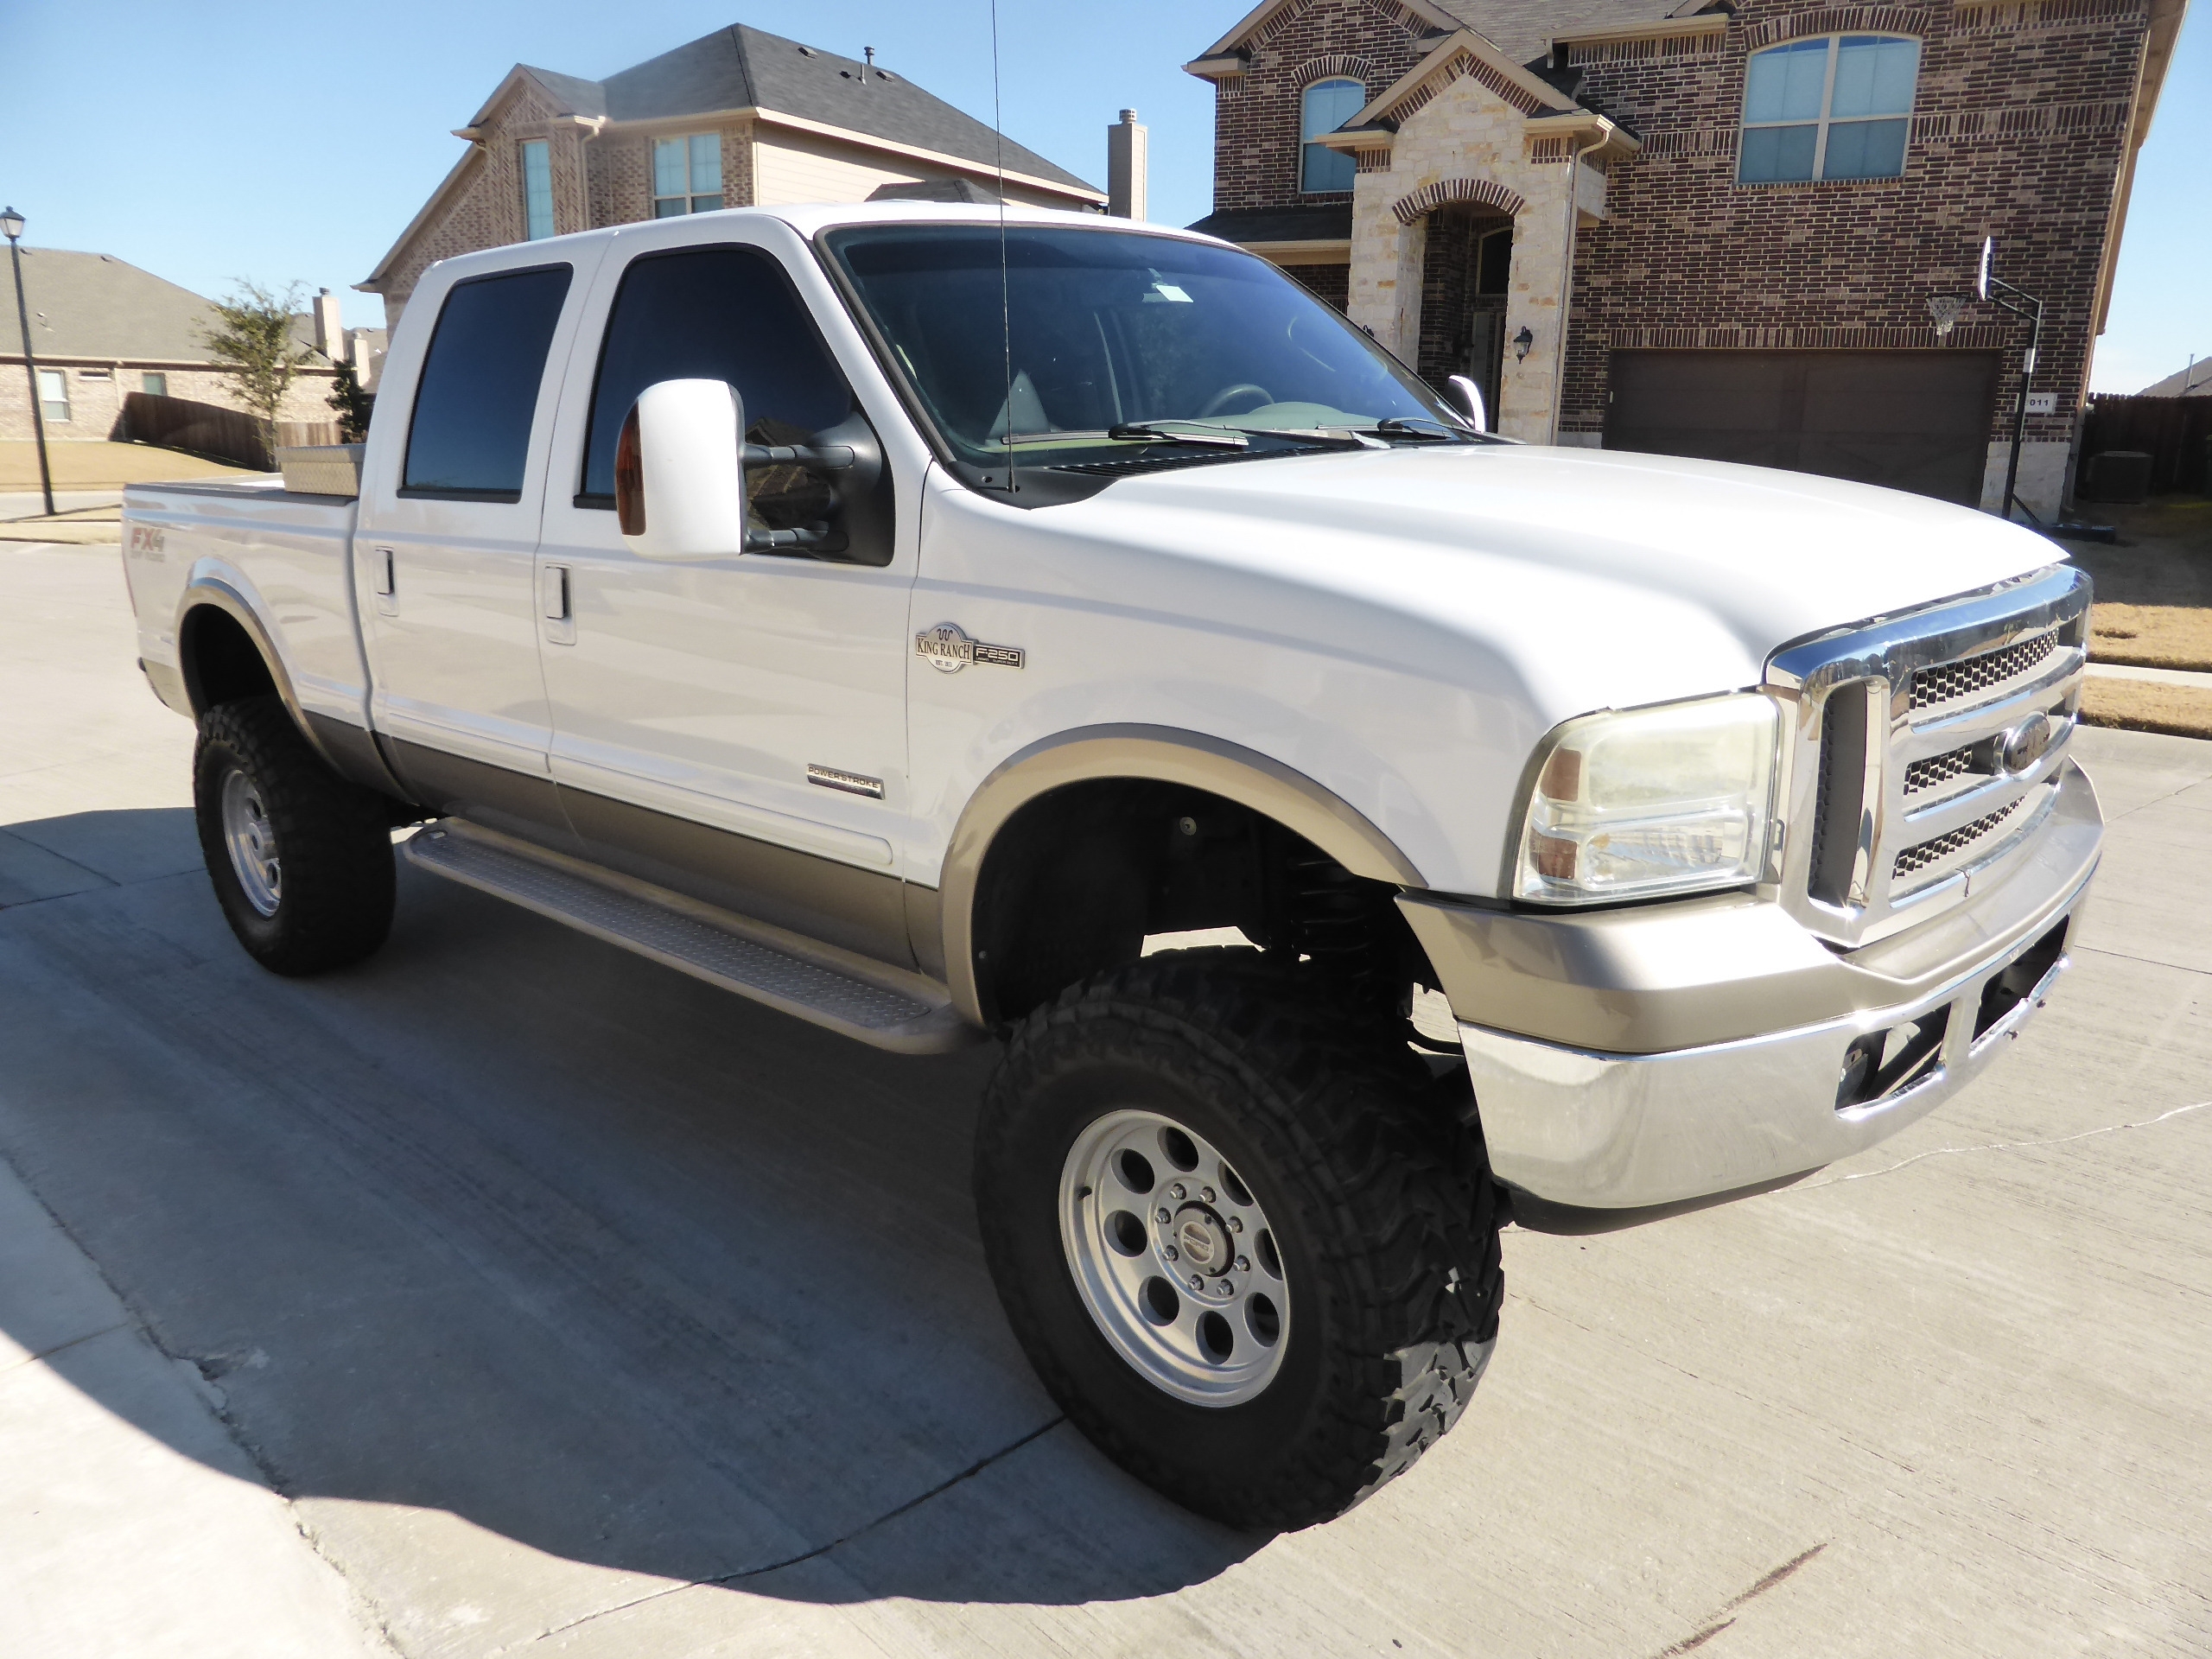 2006 Ford F 250 Crew Cab King Ranch 4wd Diesel Studded Lifted Too